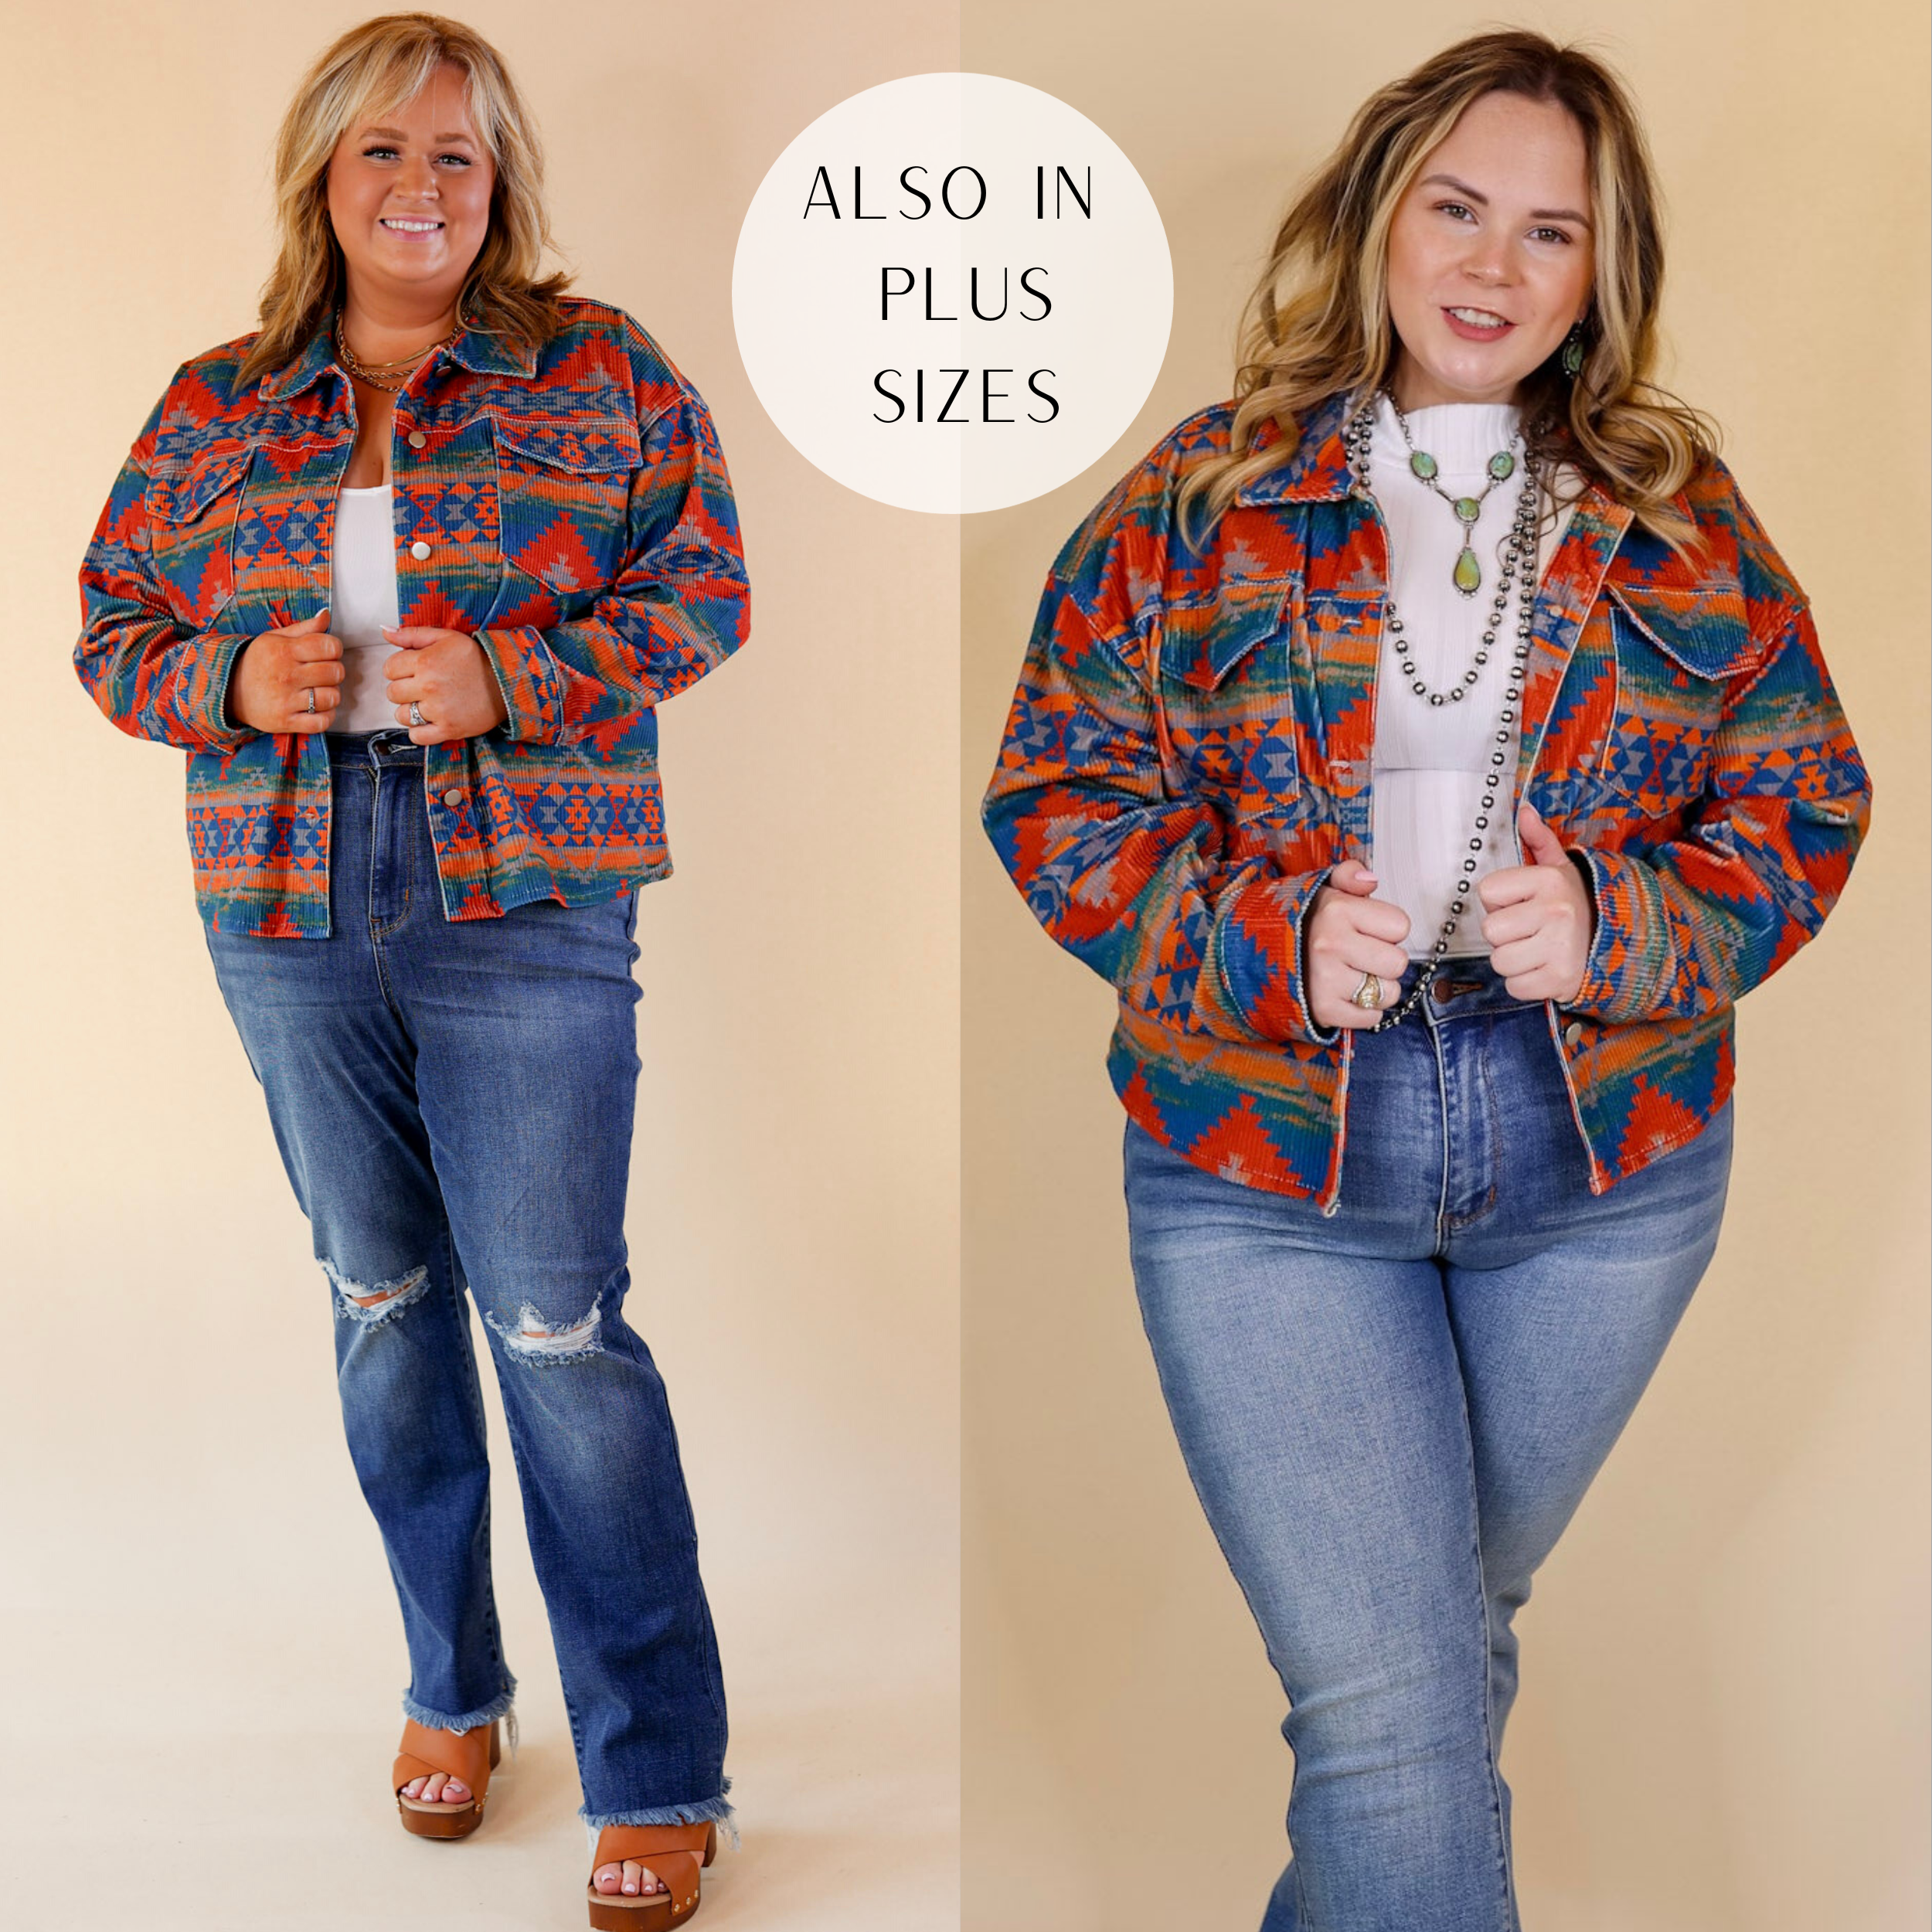 Model is wearing a button down jacket with an aztec print in red, blue, green, and orange. Model has this jacket paired with a white tank top, jeans, boots, and Navajo jewelry. Background is solid tan.